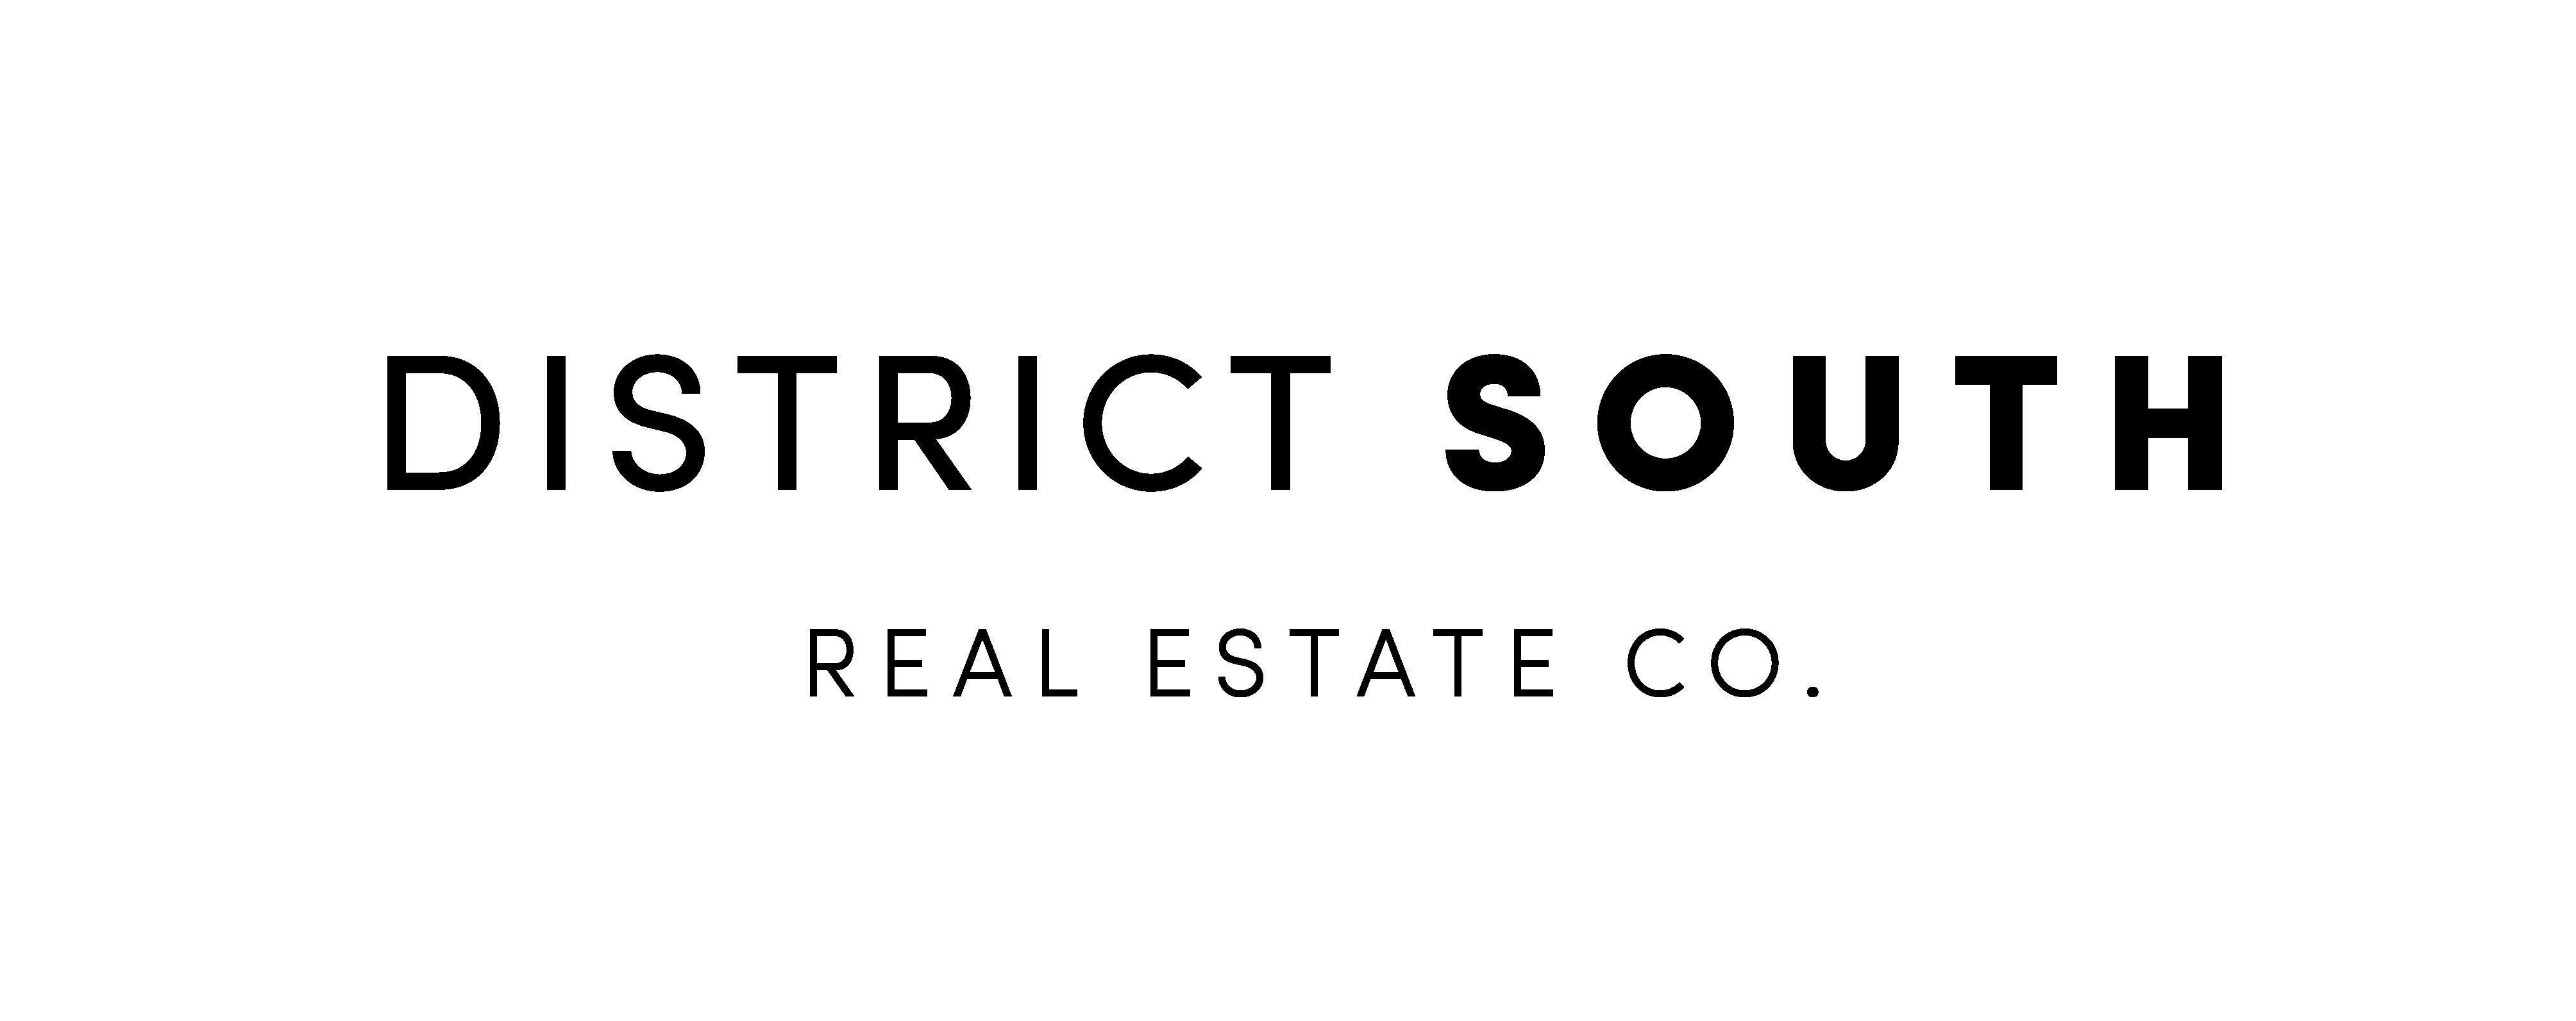 District South Real Estate Co